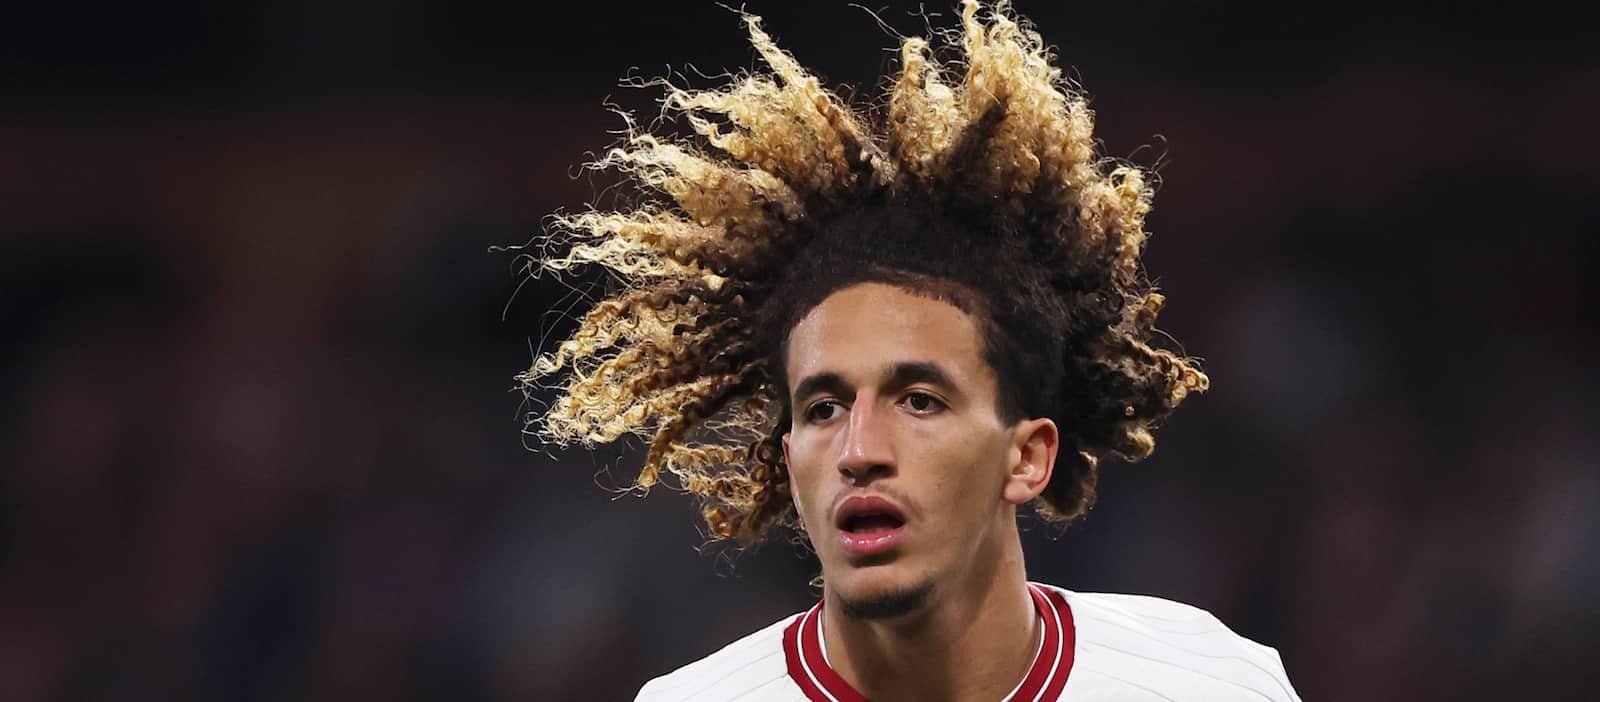 “I really like the project”: Hannibal Mejbri speaks after first training session since Sevilla loan move – Man United News And Transfer News